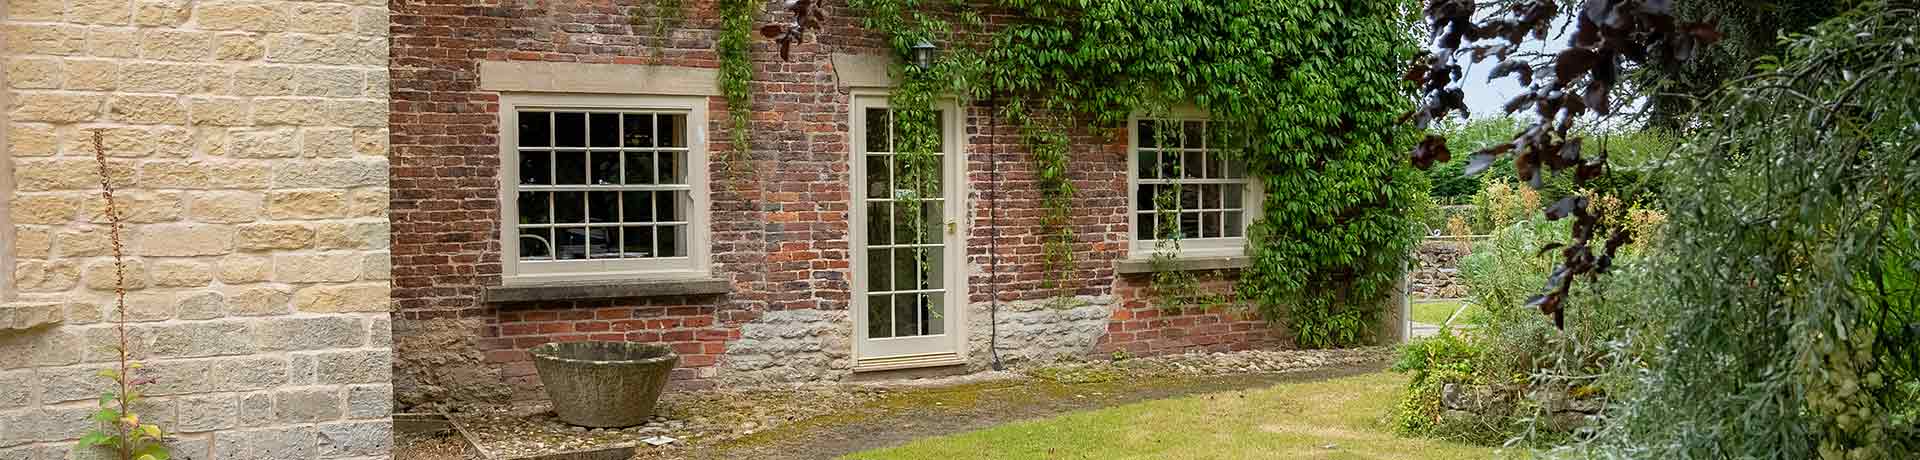 Holiday cottages with 2 bedrooms in Somerset